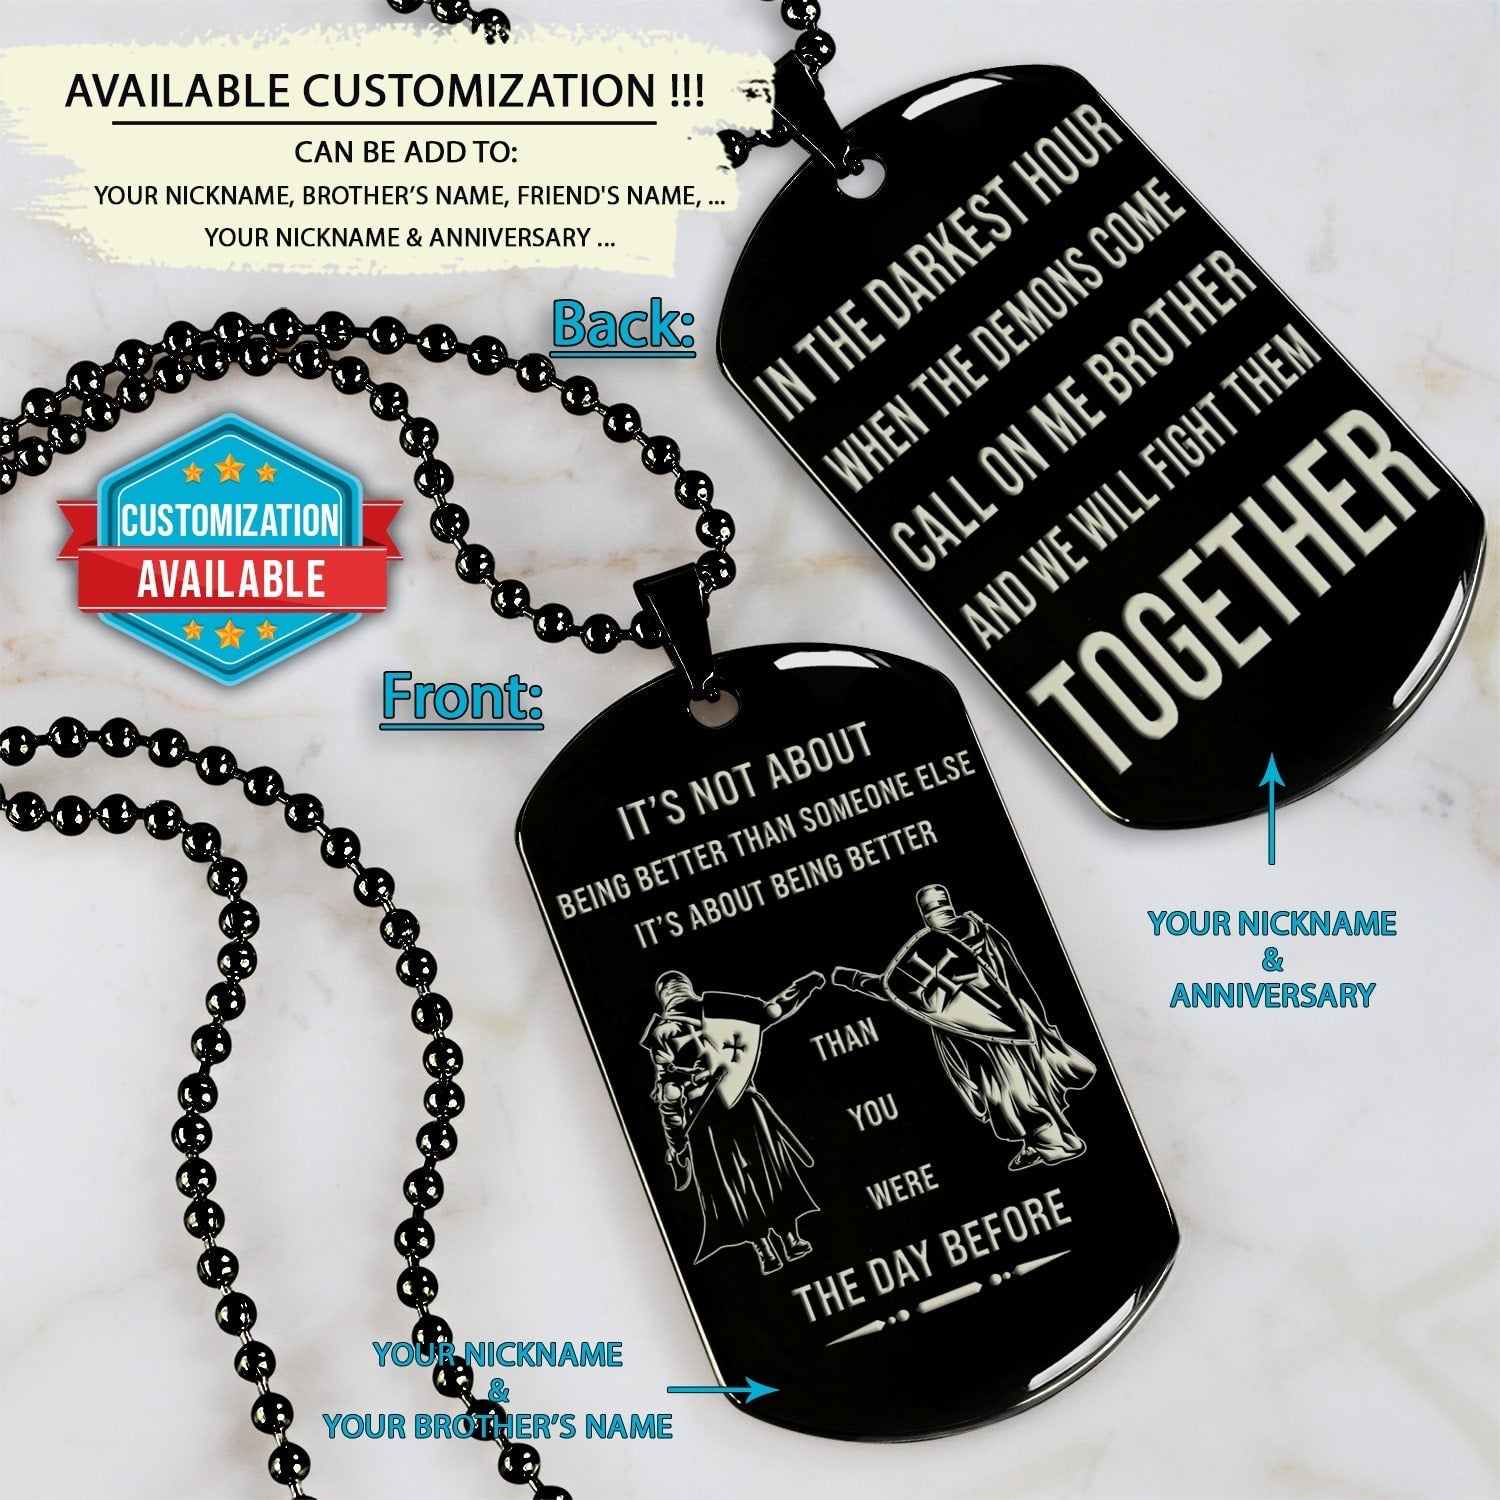 KTD031 - Call On Me Brother - It's About Being Better Than You Were The Day Before - Knights Templar - Black Double-Sided Dog Tag